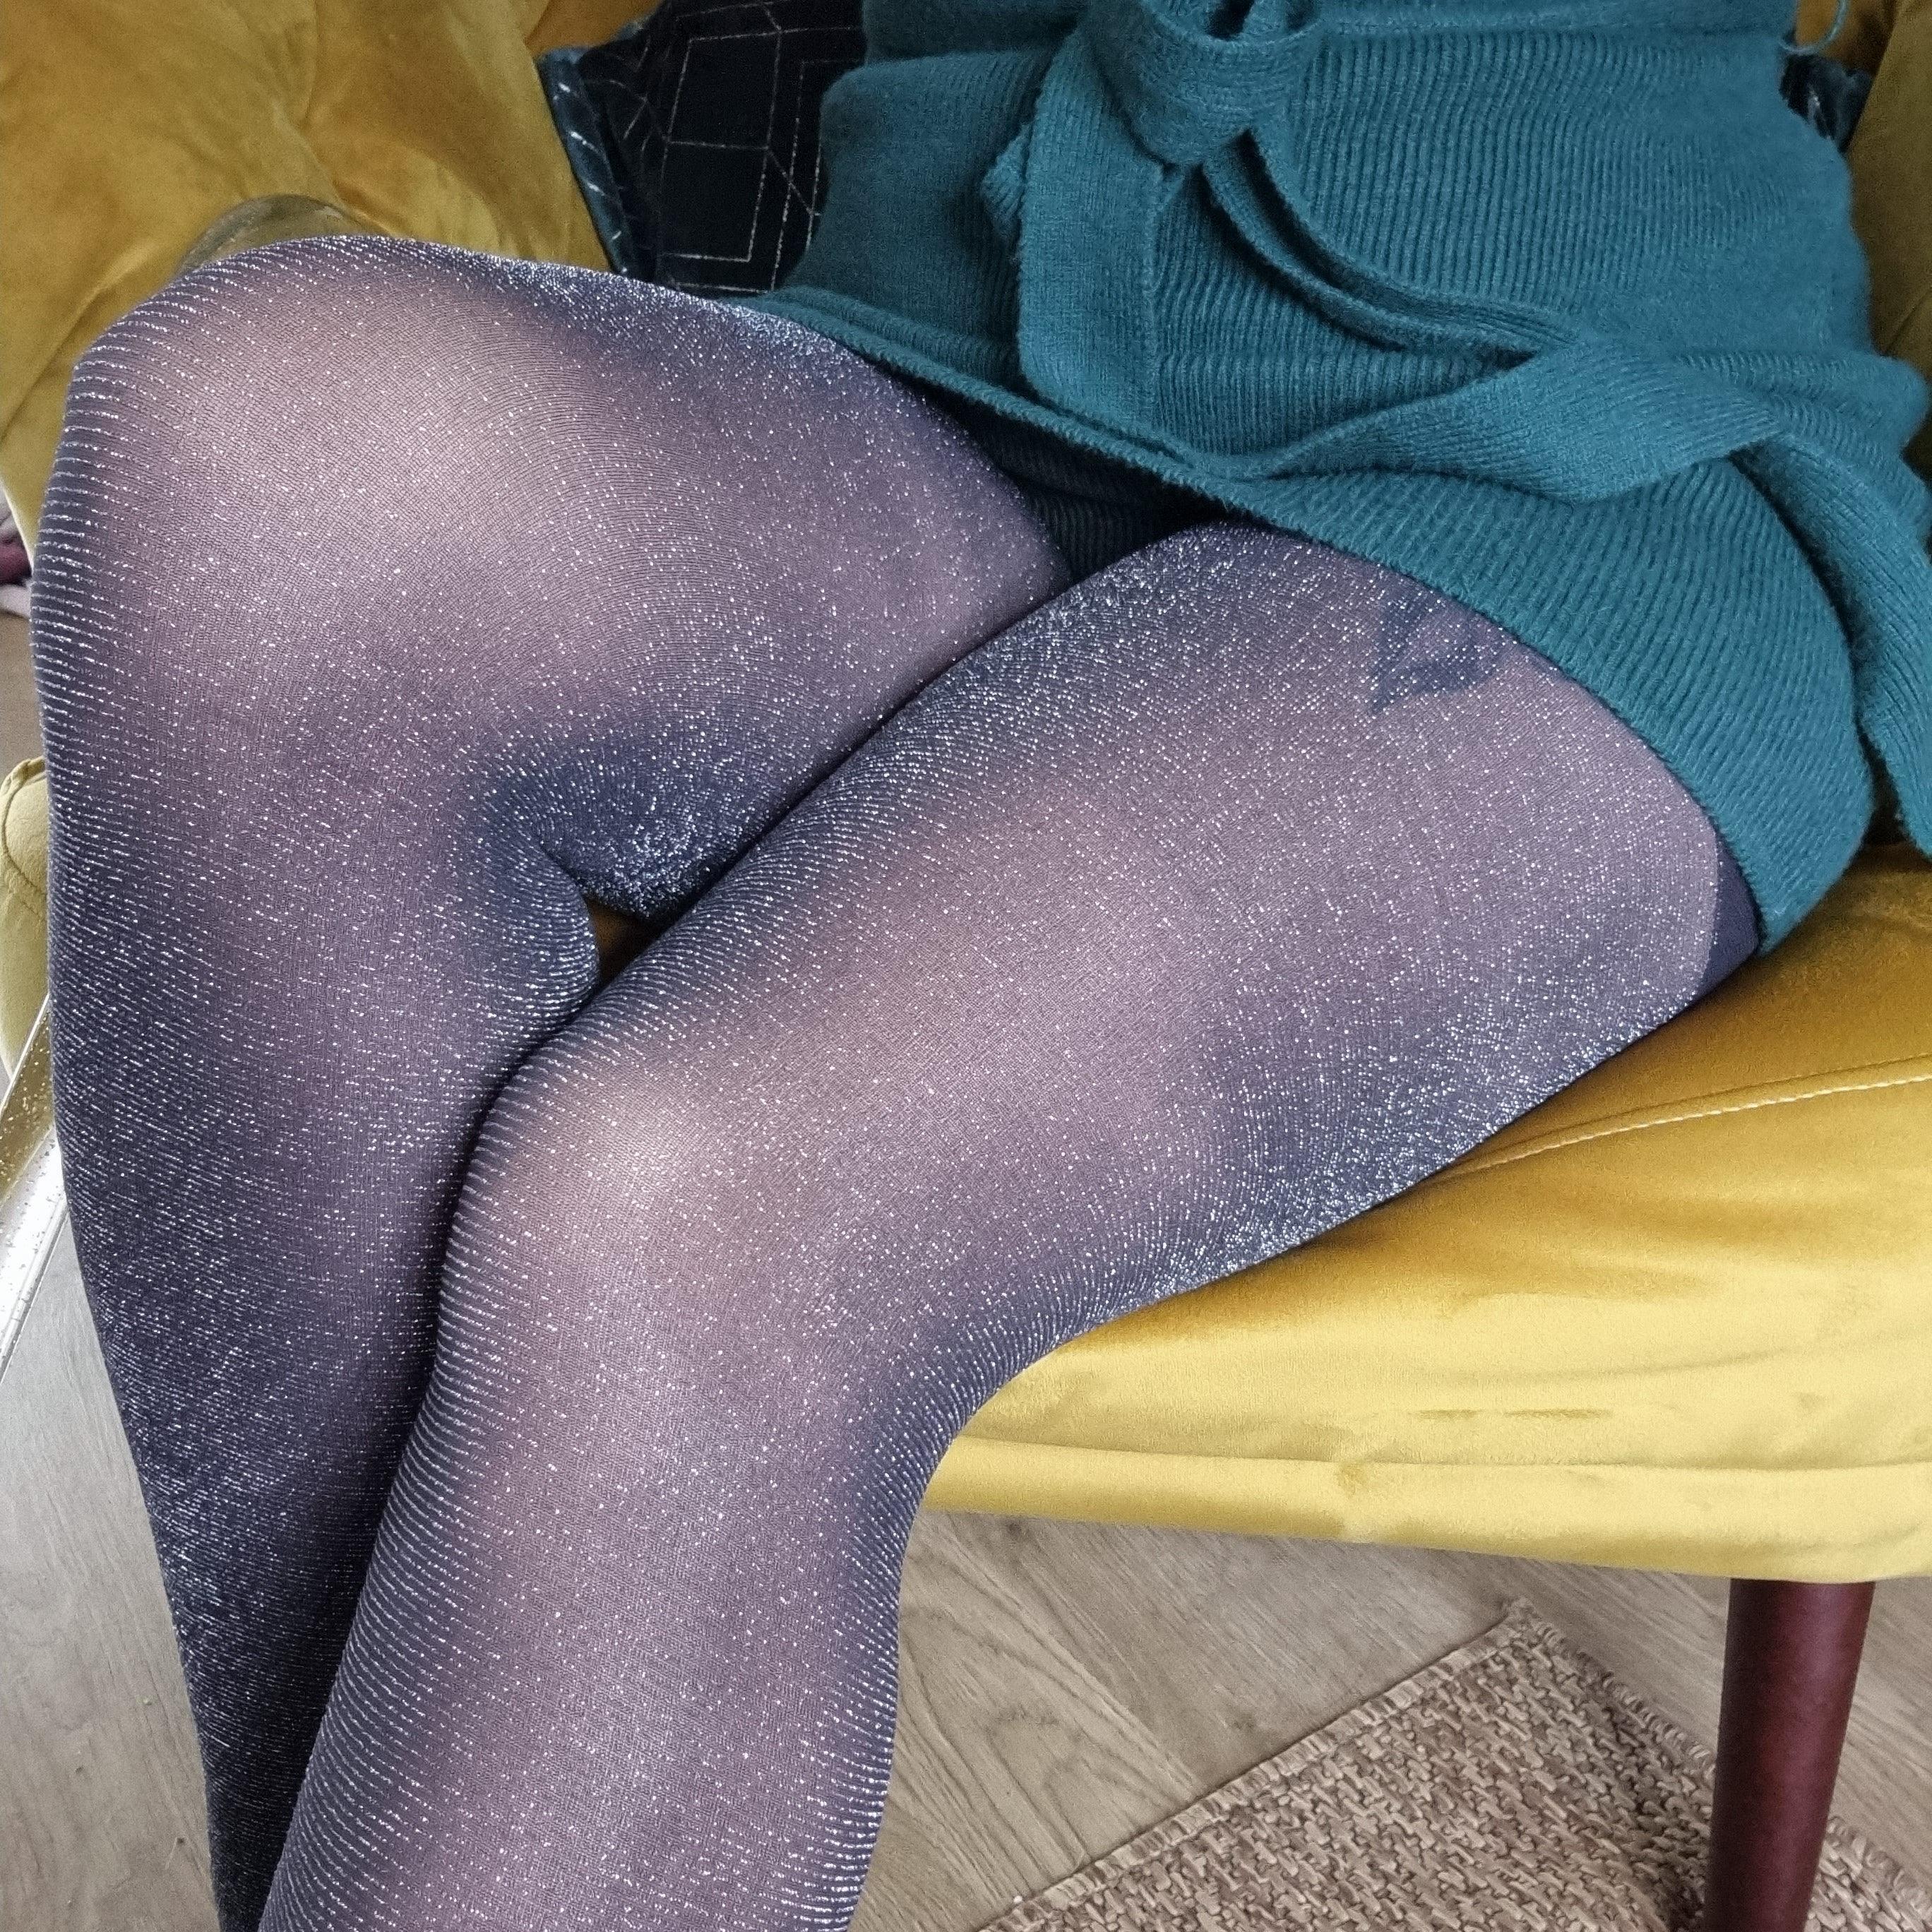 30 Denier Sheer Glitter Tights In Black - Epic Party Tights